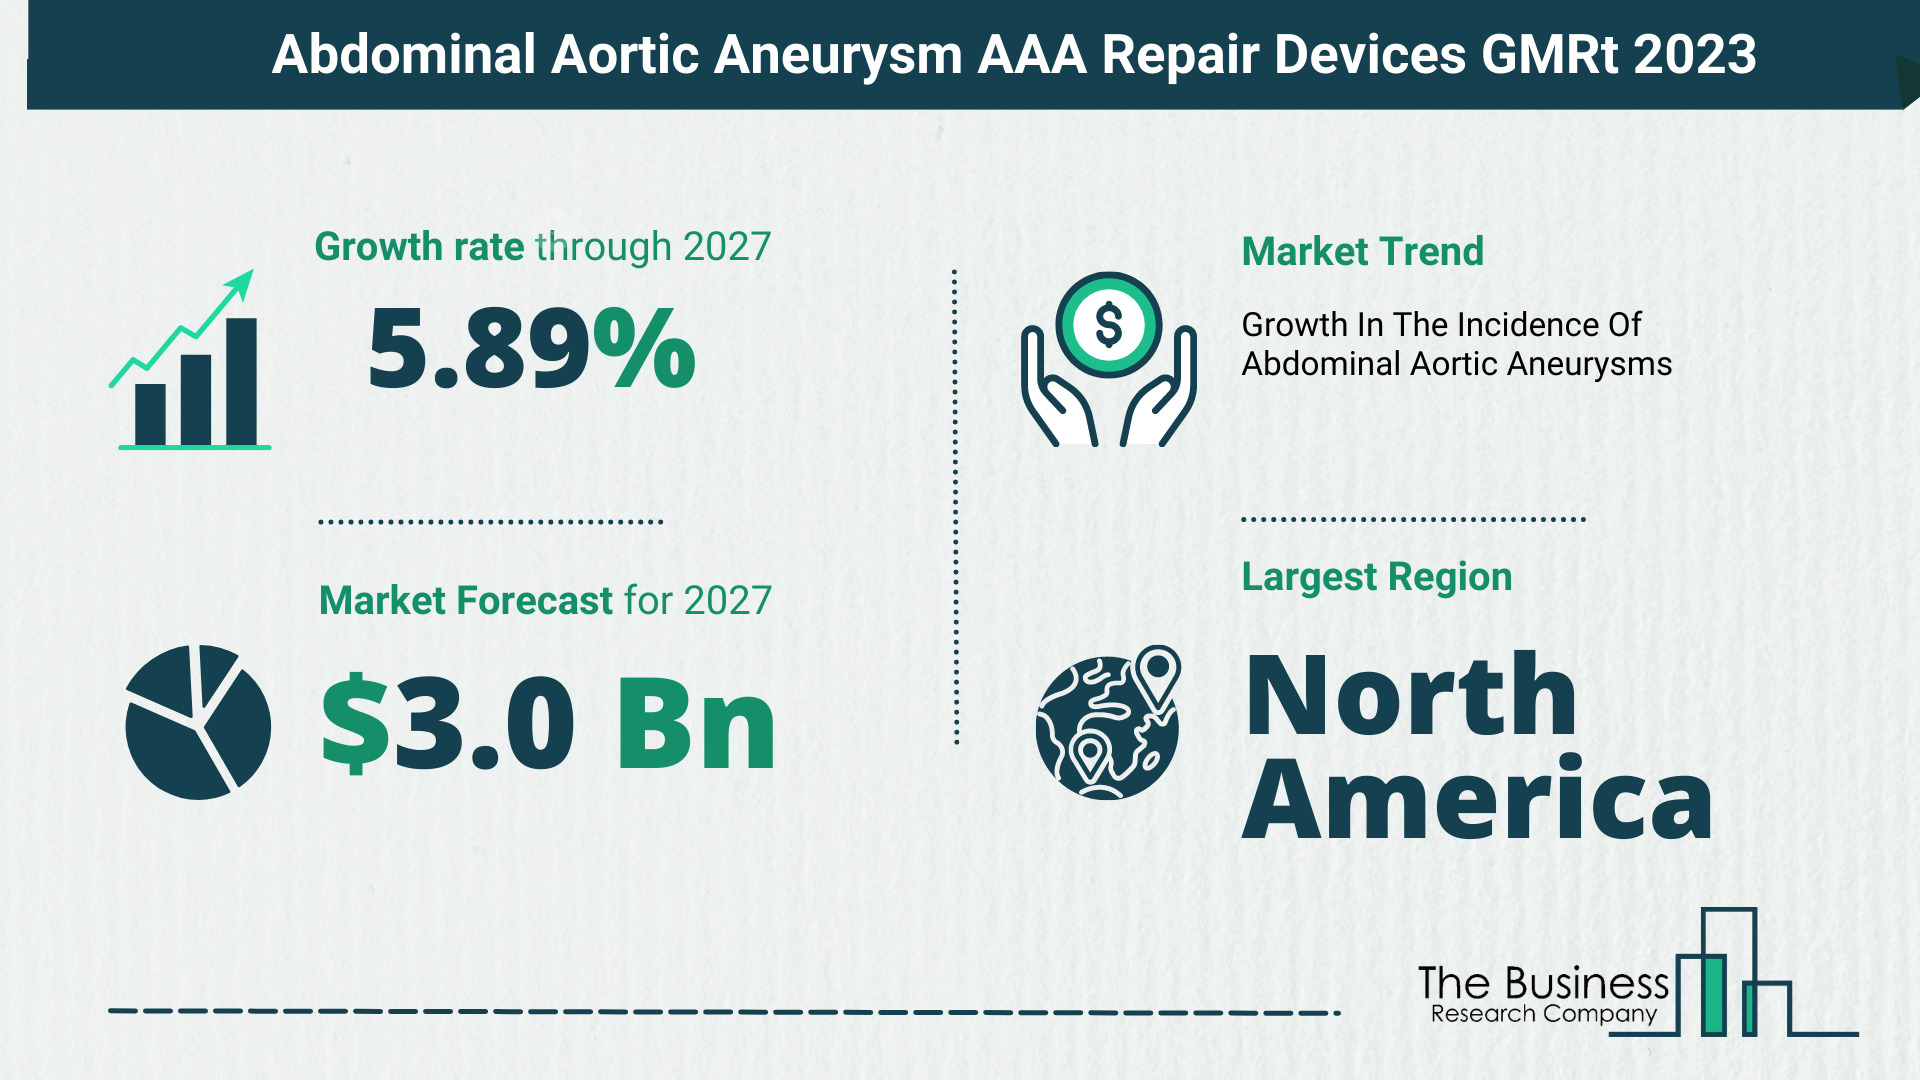 What Will The Abdominal Aortic Aneurysm AAA Repair Devices Market Look Like In 2023?